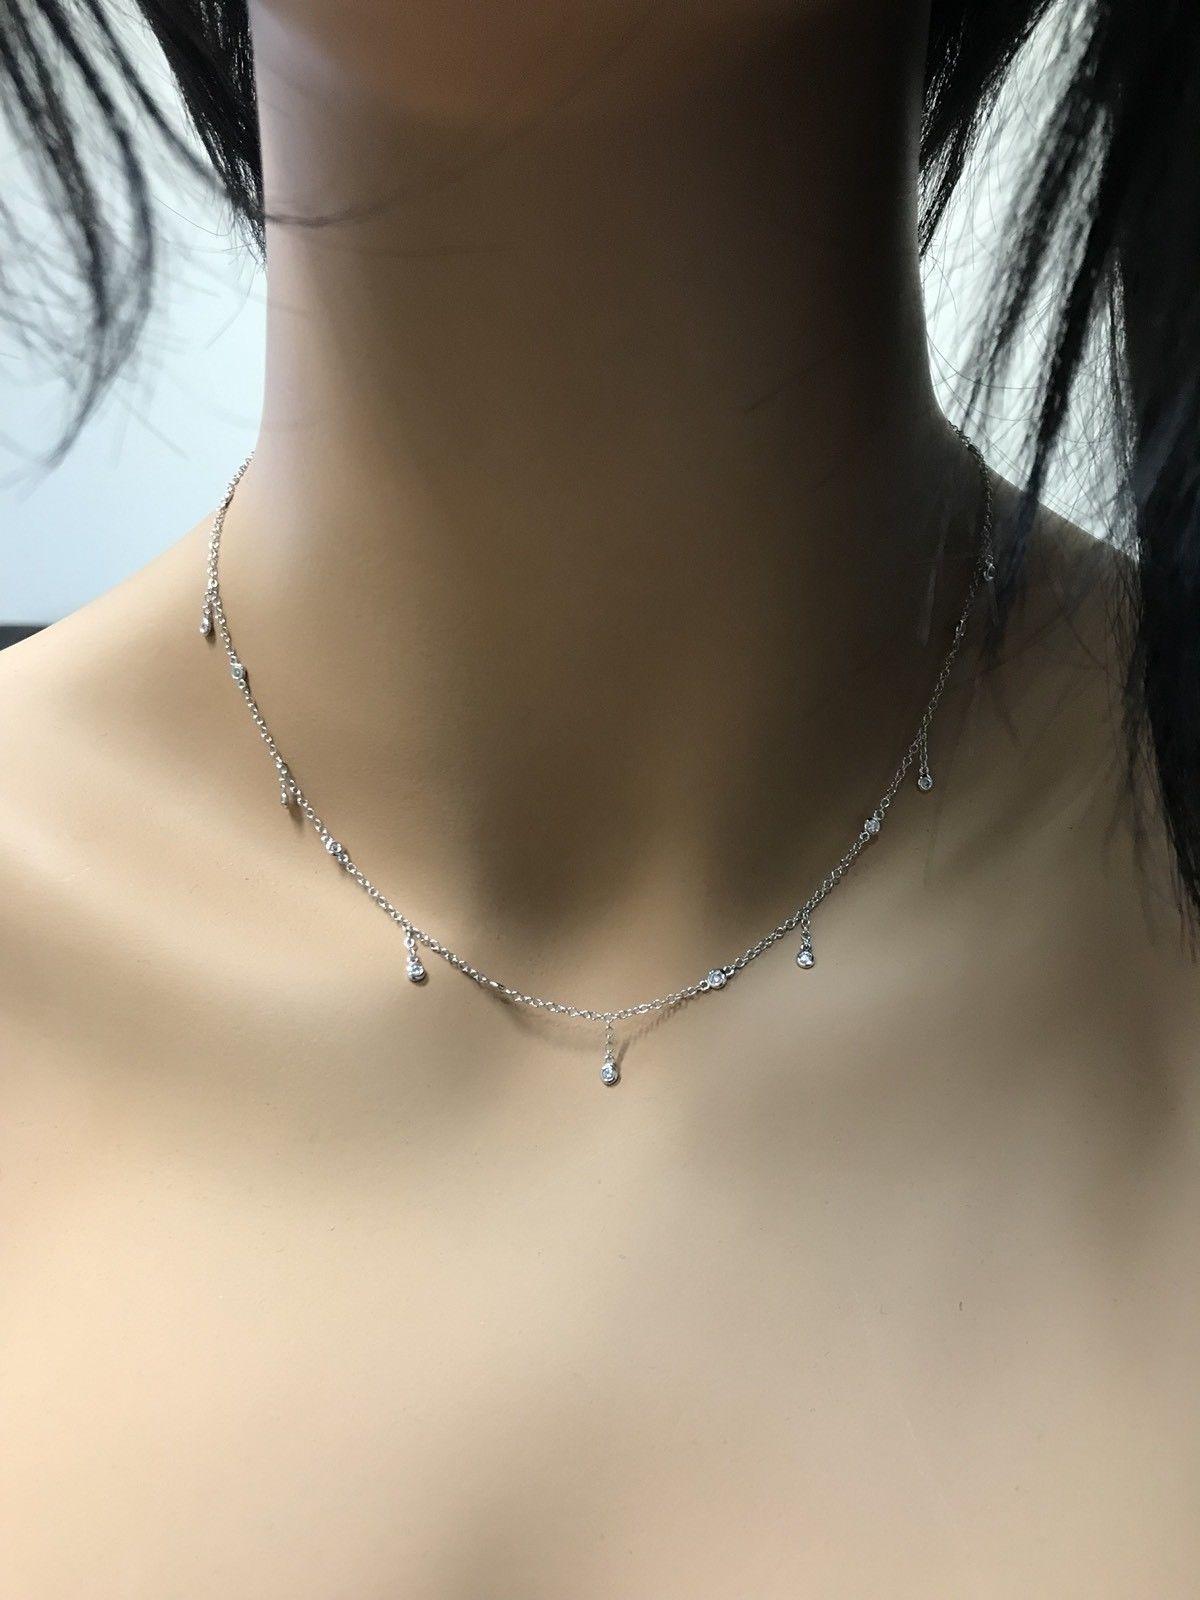 Splendid 14k Solid White Gold Chain Necklace

Amazing looking piece! 

Stamped: 14k

Total Diamond Weight is: Approx. 0.45 Carats (G-H / SI1)

Chain Length is: 16 inches

Total item weight is: 2.7 grams

Disclaimer: all weights, measurements and